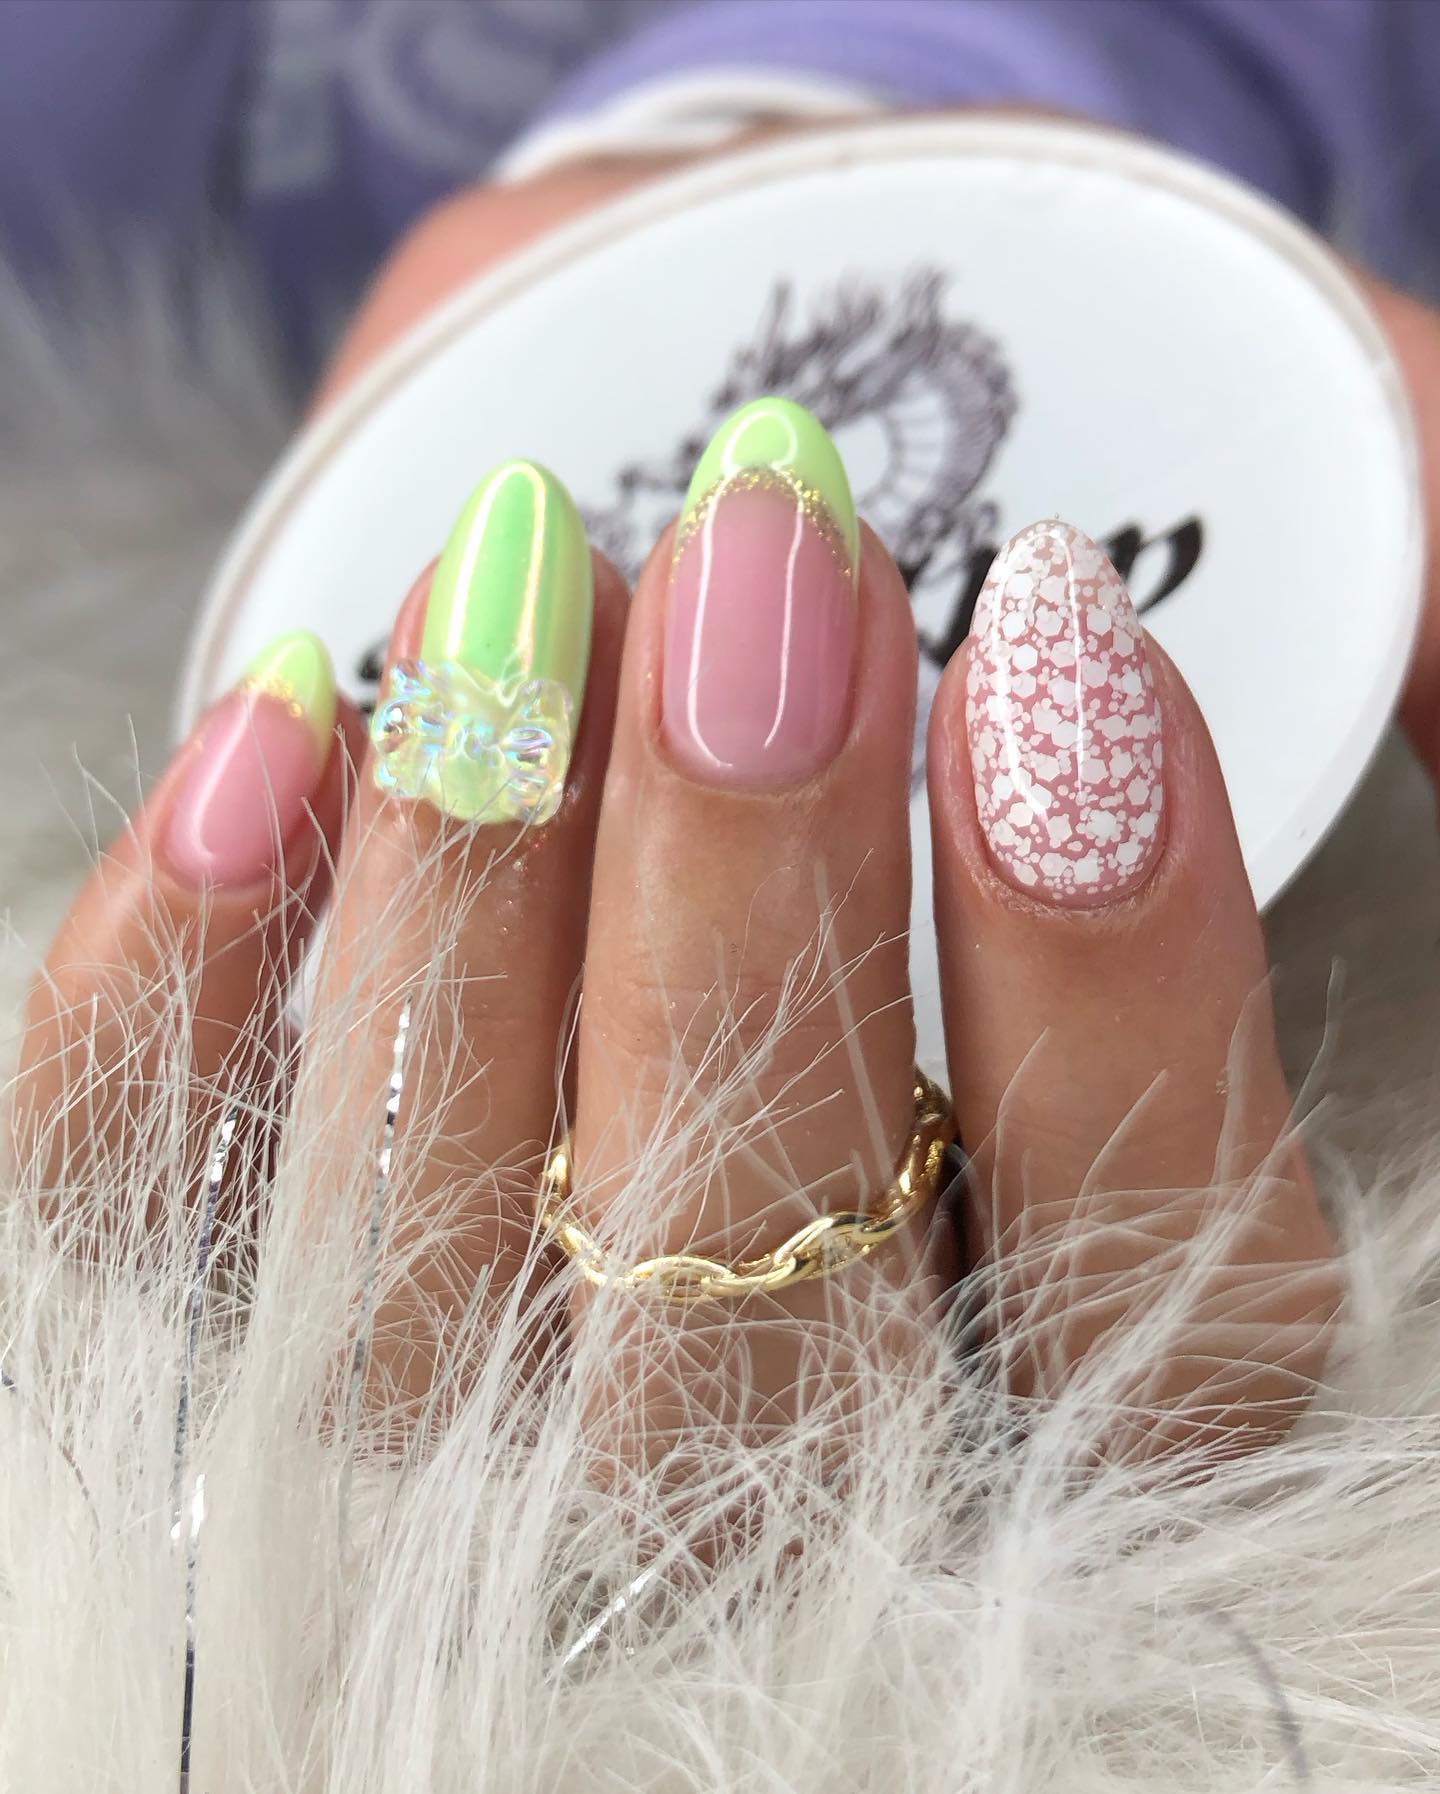 100 Of The Best Spring Inspired Nail Designs images 84